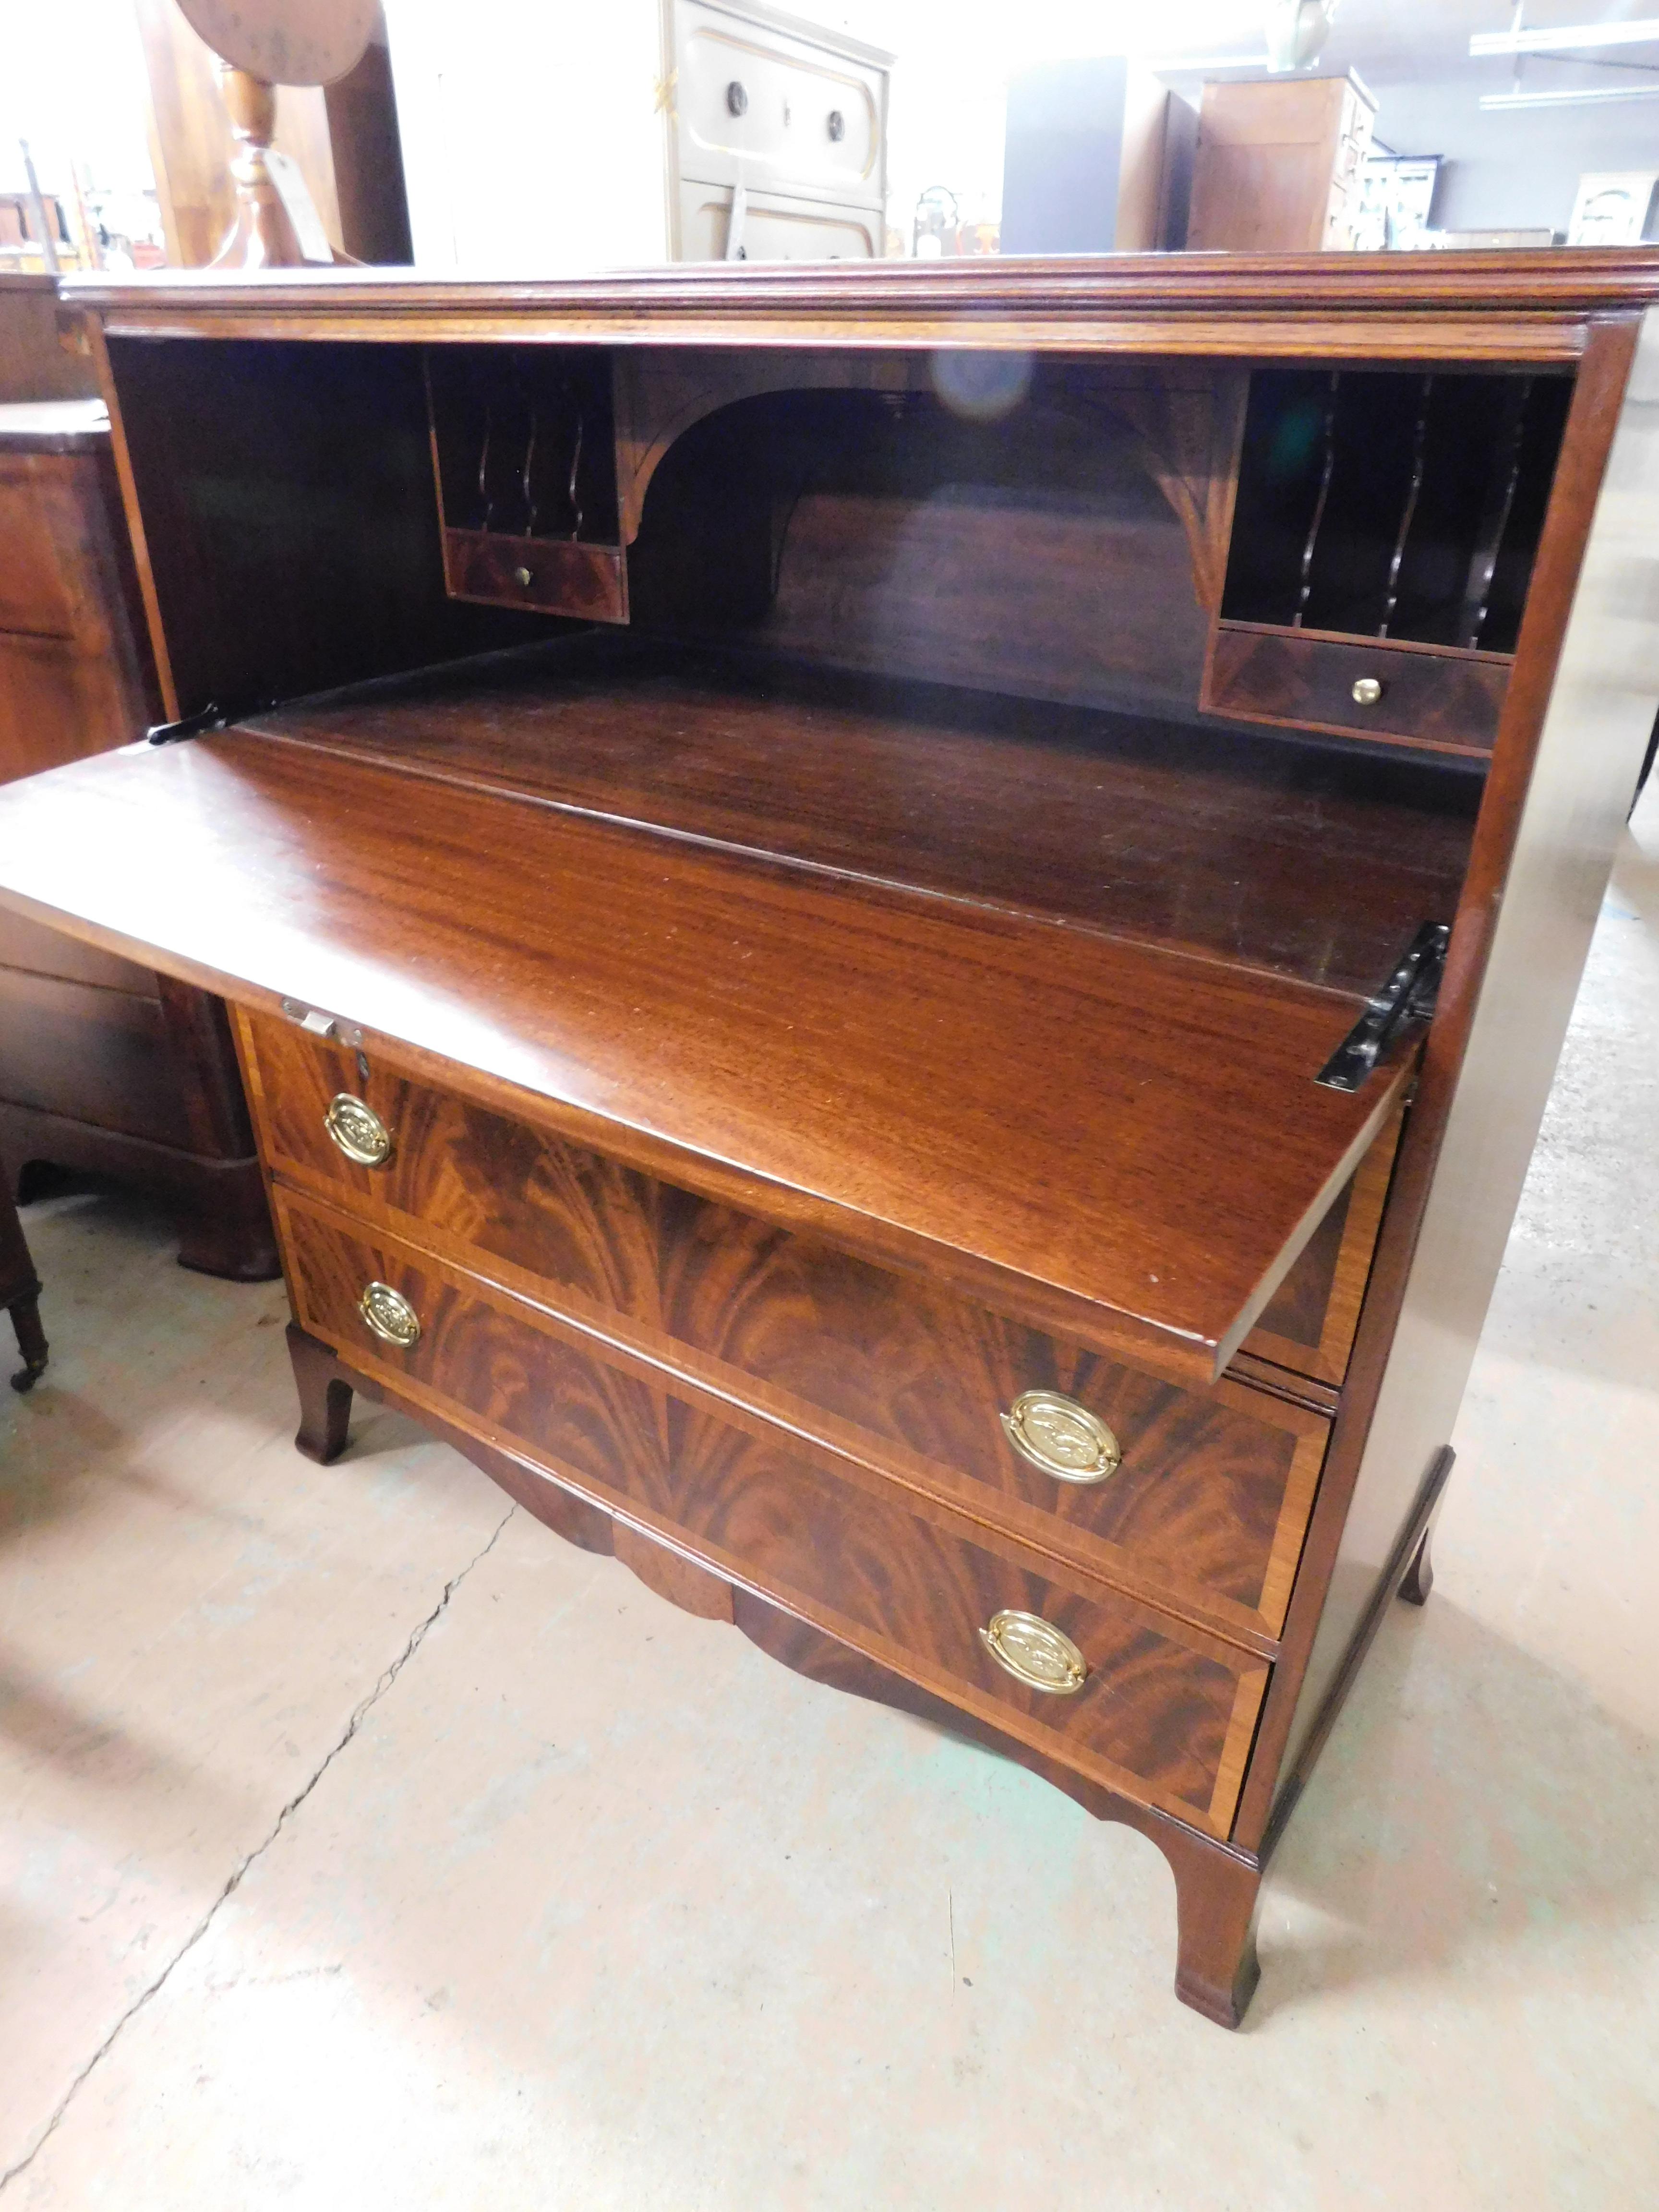 Features fine high quality made construction, 3 Large Dovetailed Drawers, Drop front writing surface with 2 internal small drawers, Figured Mahogany Satinwood Inlay, Brass Hardware, with Key

approx 80 years old

Very Good Antique Original